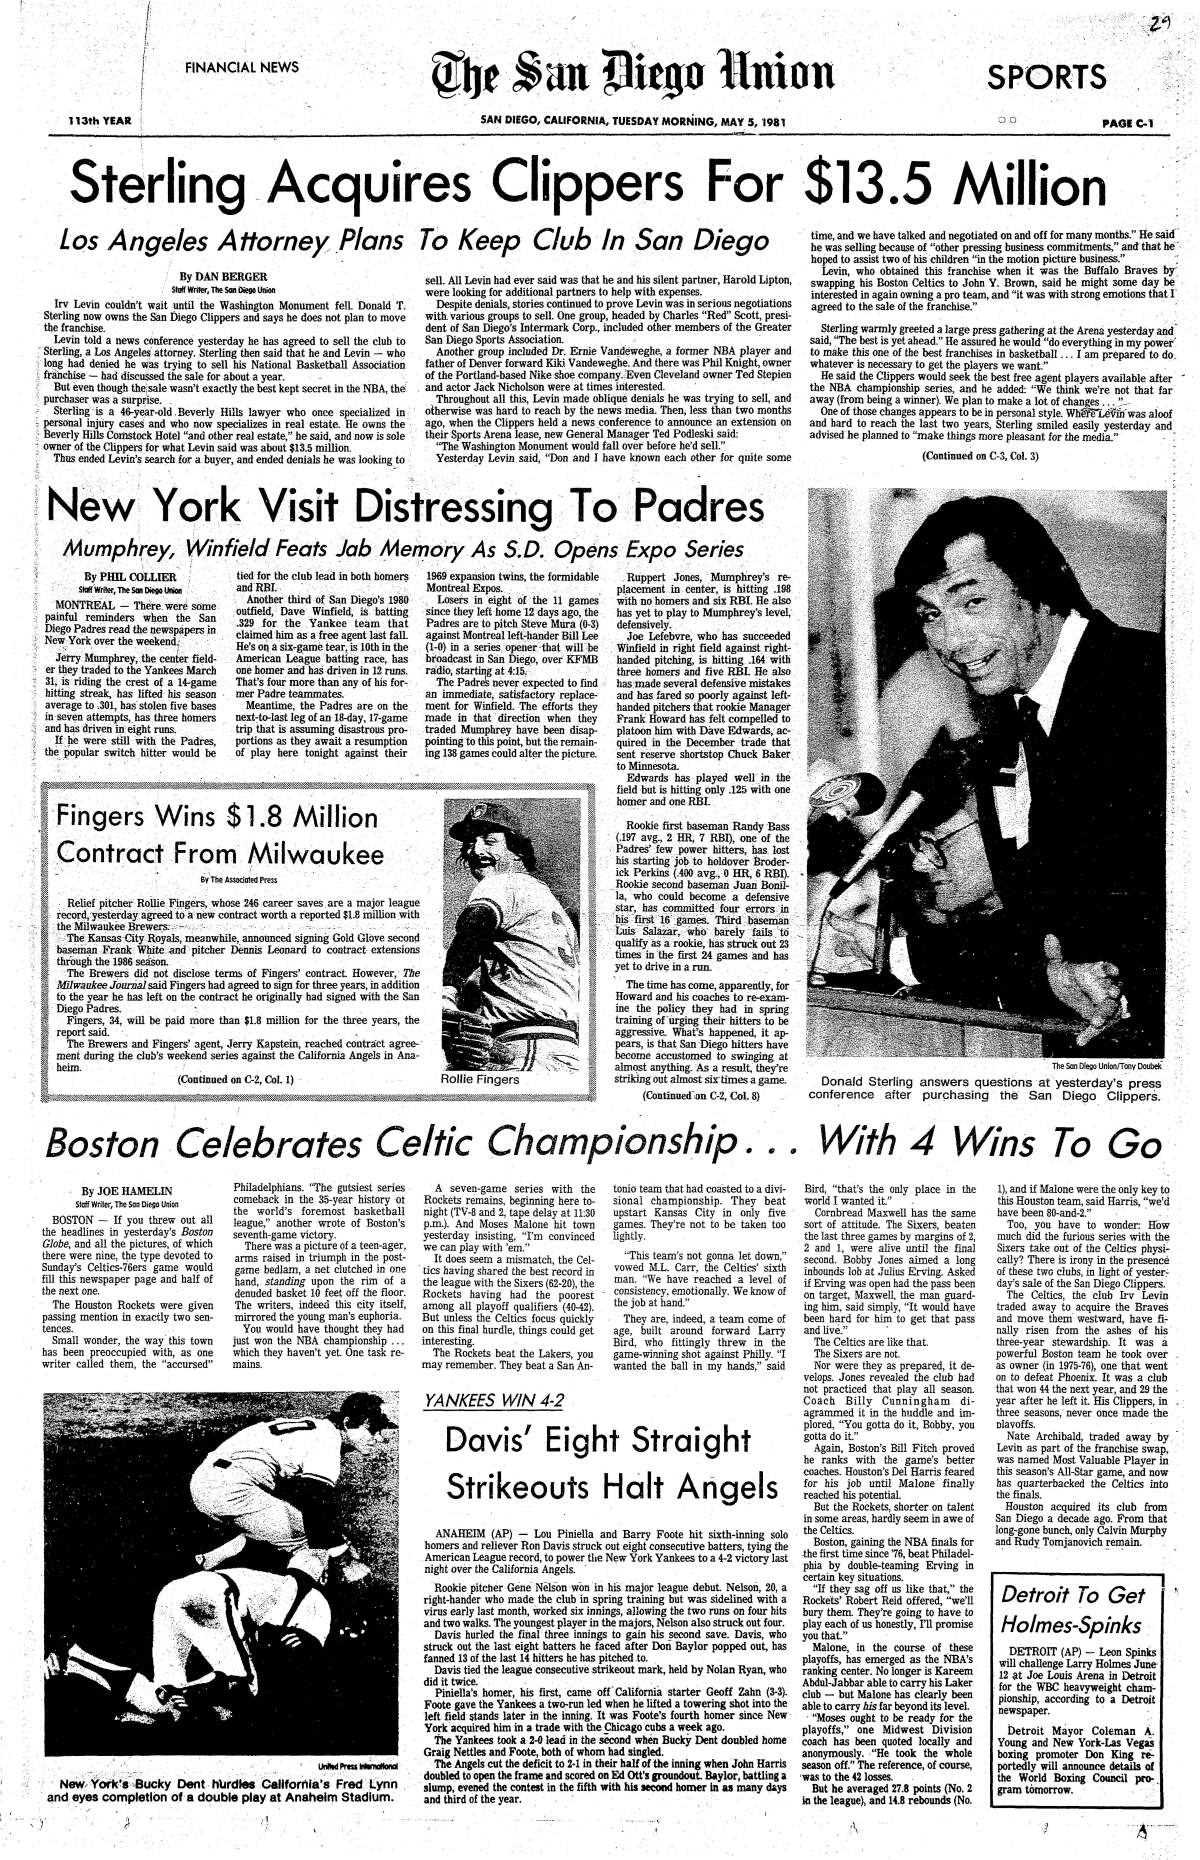 "Sterling Acquires Clippers" headline published in The San Diego Union, May 5, 1981.